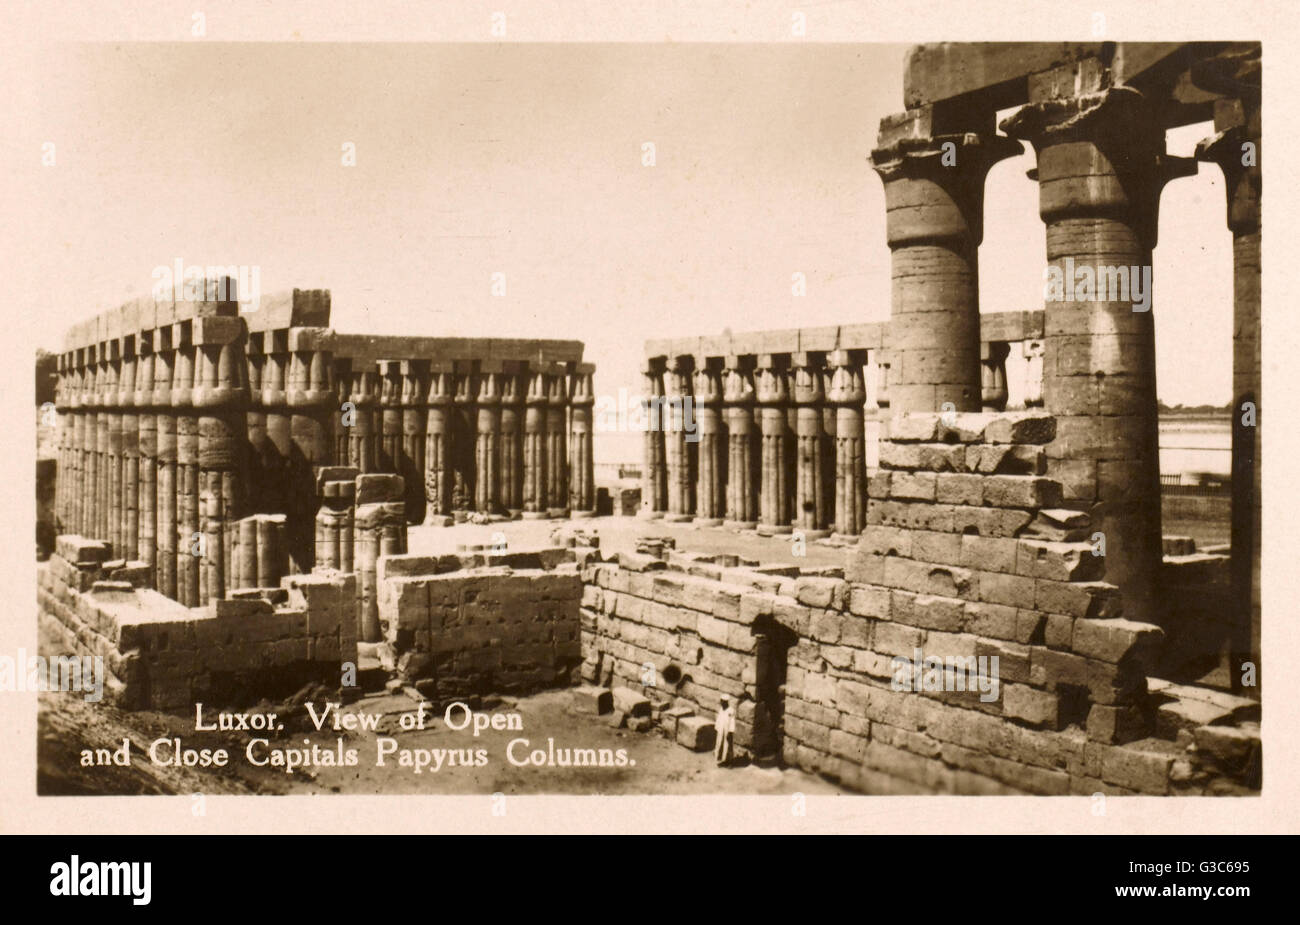 Luxor Temple Complex - Papyrus Columns of Amenhotep III Stock Photo